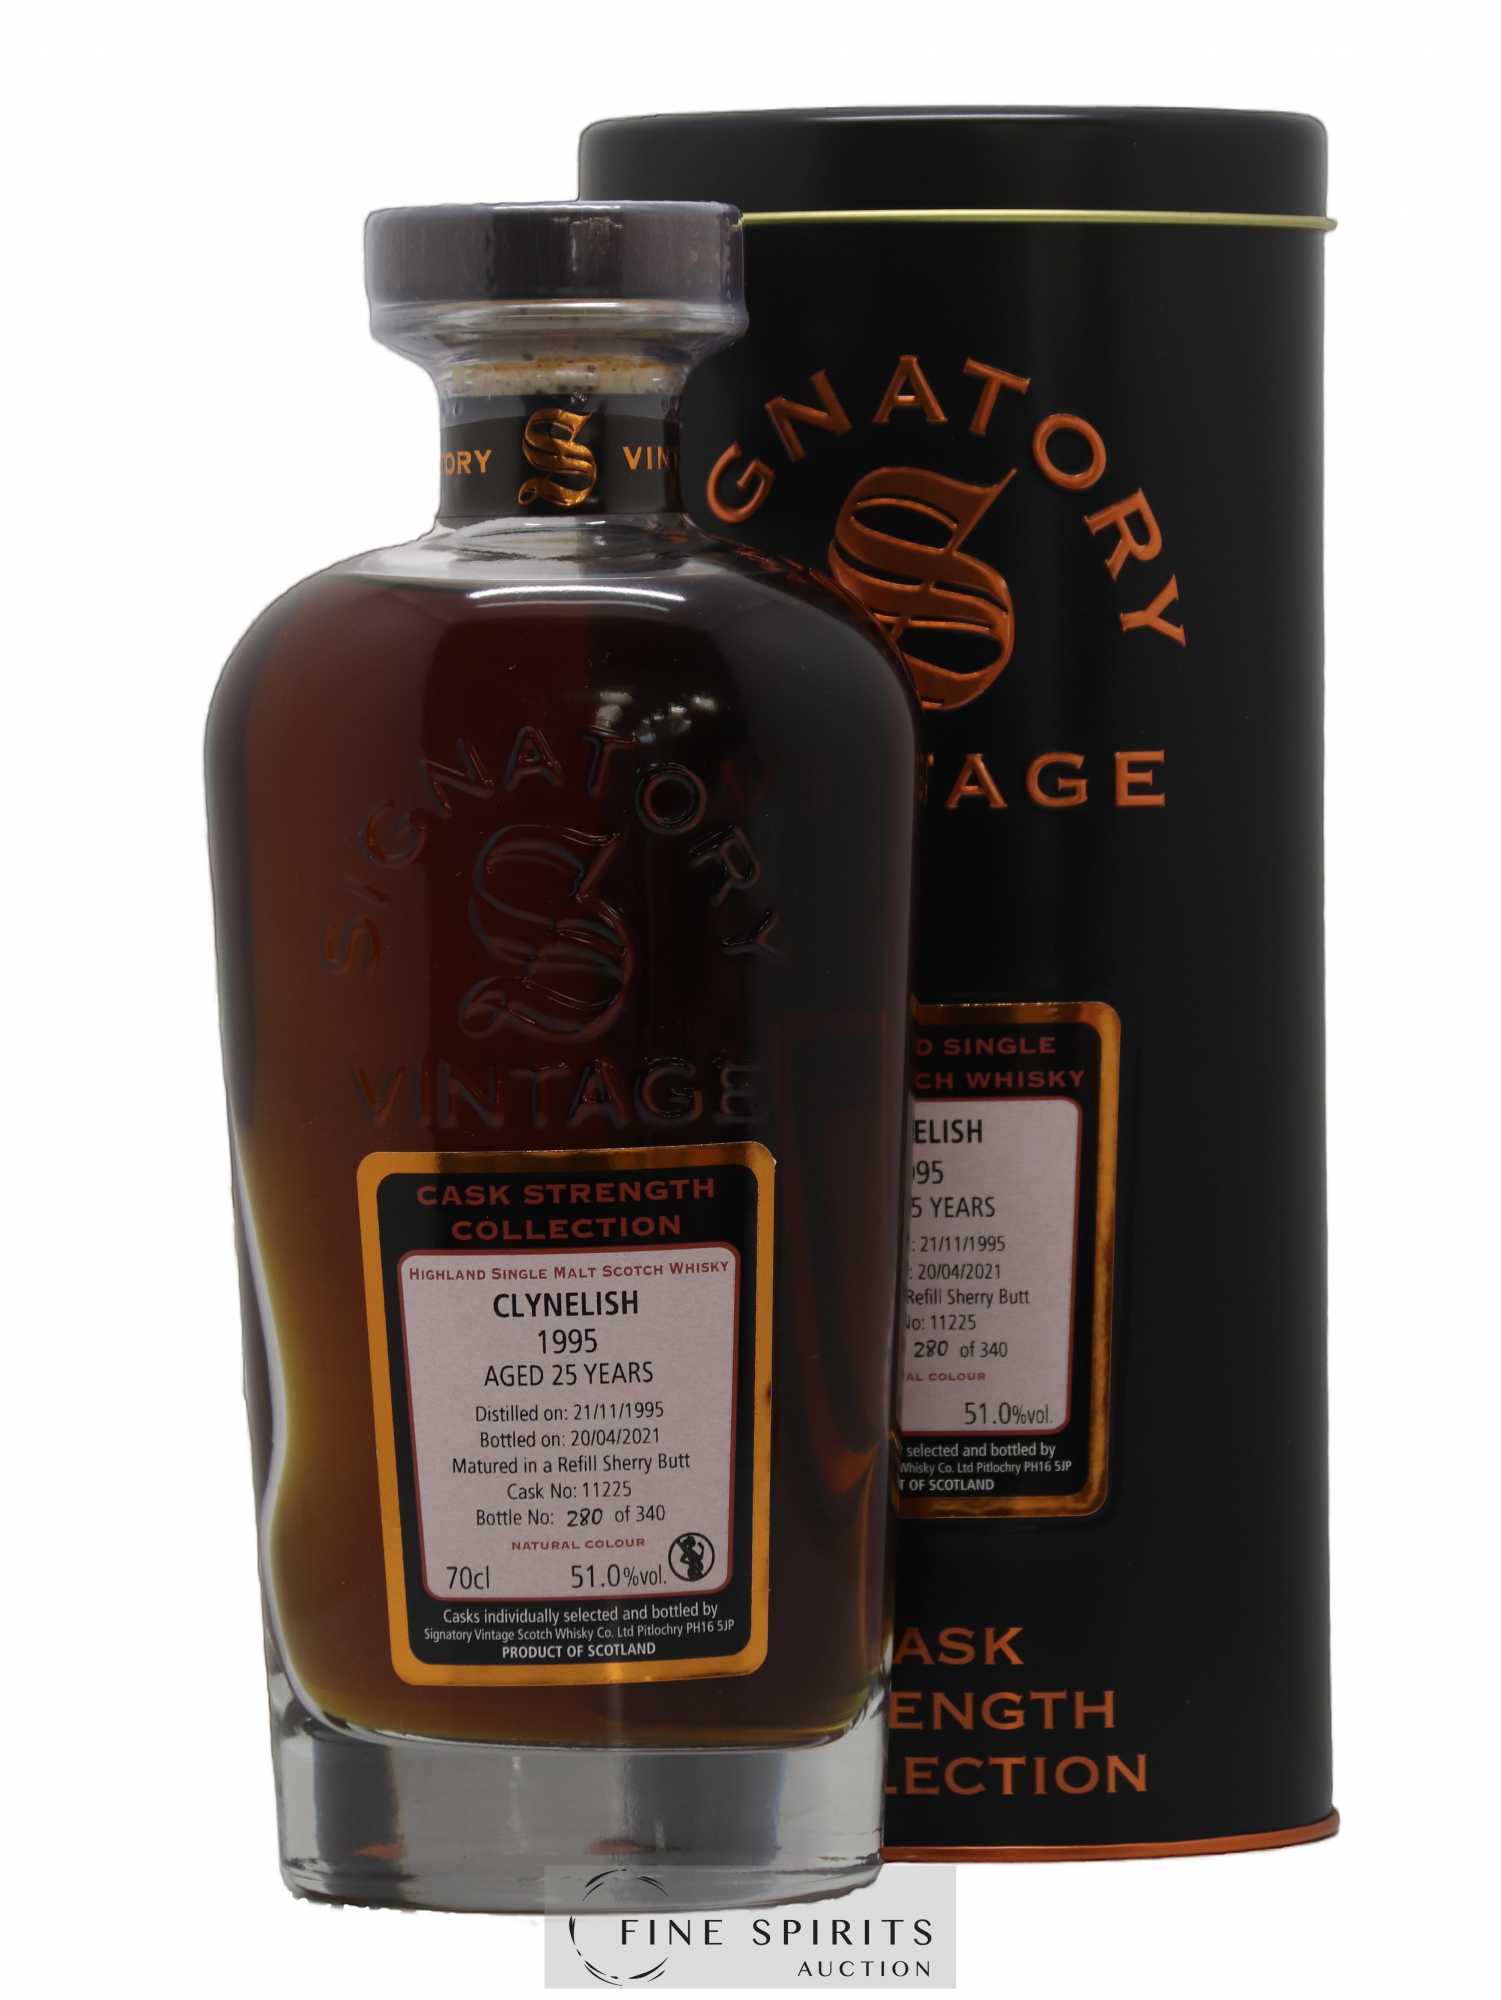 Clynelish 25 years 1995 Signatory Vintage Refill Sherry Butt n°11225 - One of 340 - bottled 2021 Cask Strength Collection 